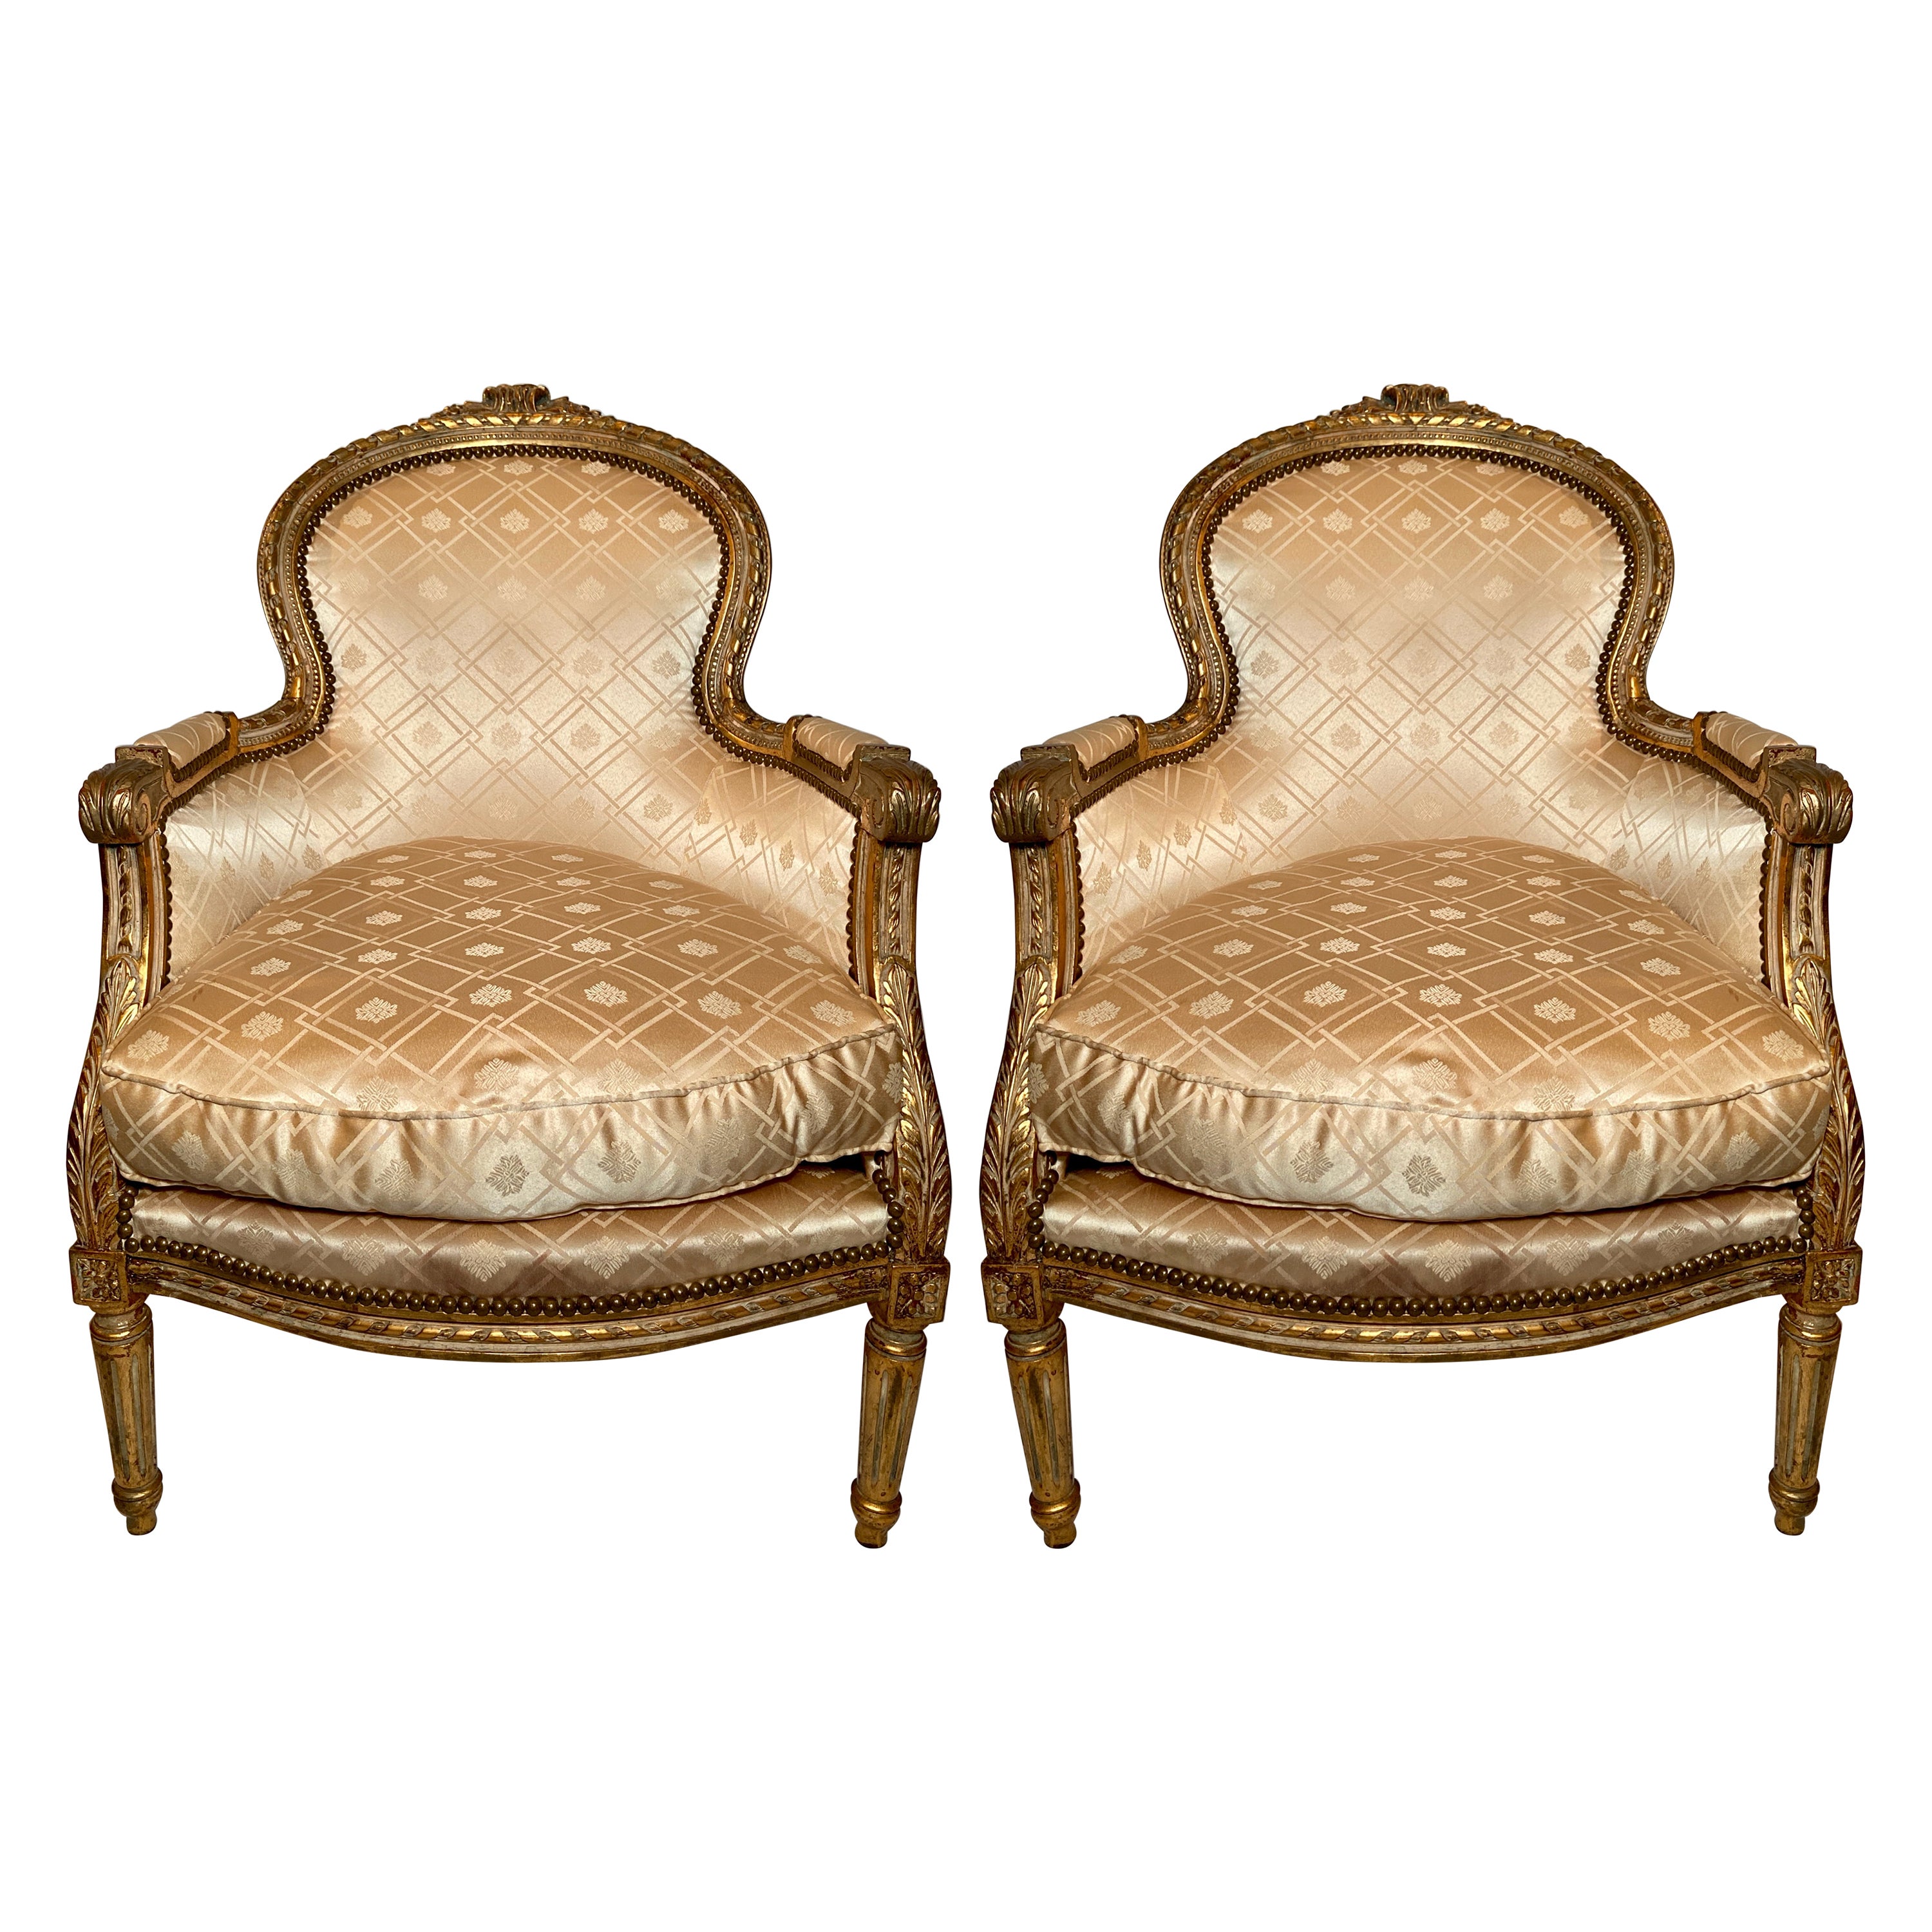 Pair Antique French Silk Upholstered Giltwood Carved Arm-Chairs, Circa 1890-1910